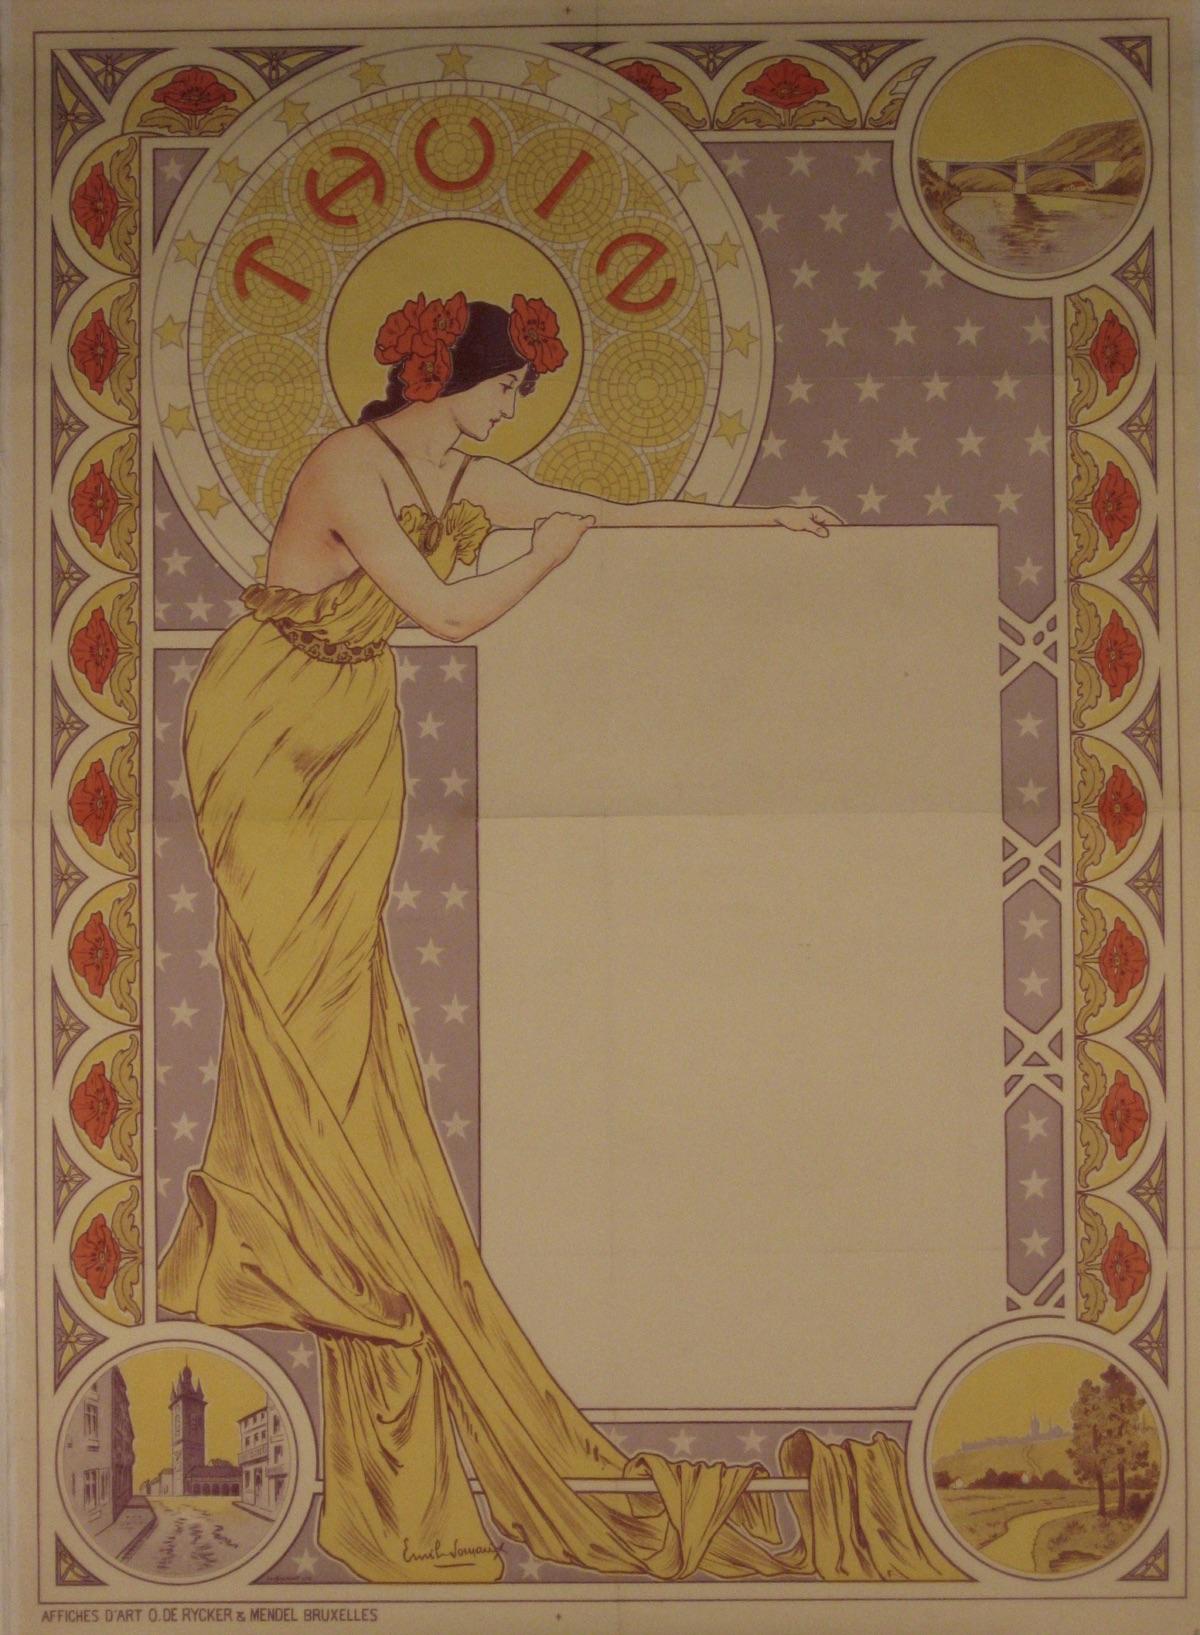 Artist: Emil Jornaux

Date of Origin: circa 1900

Medium: Original Stone Lithograph Vintage Poster

Size: 40” x 55”

 

Wonderful pre-type Art Nouveau poster for an Exposition in the Belgian city of Thuin. Printed by Affiches D’Art O. de Rycker &